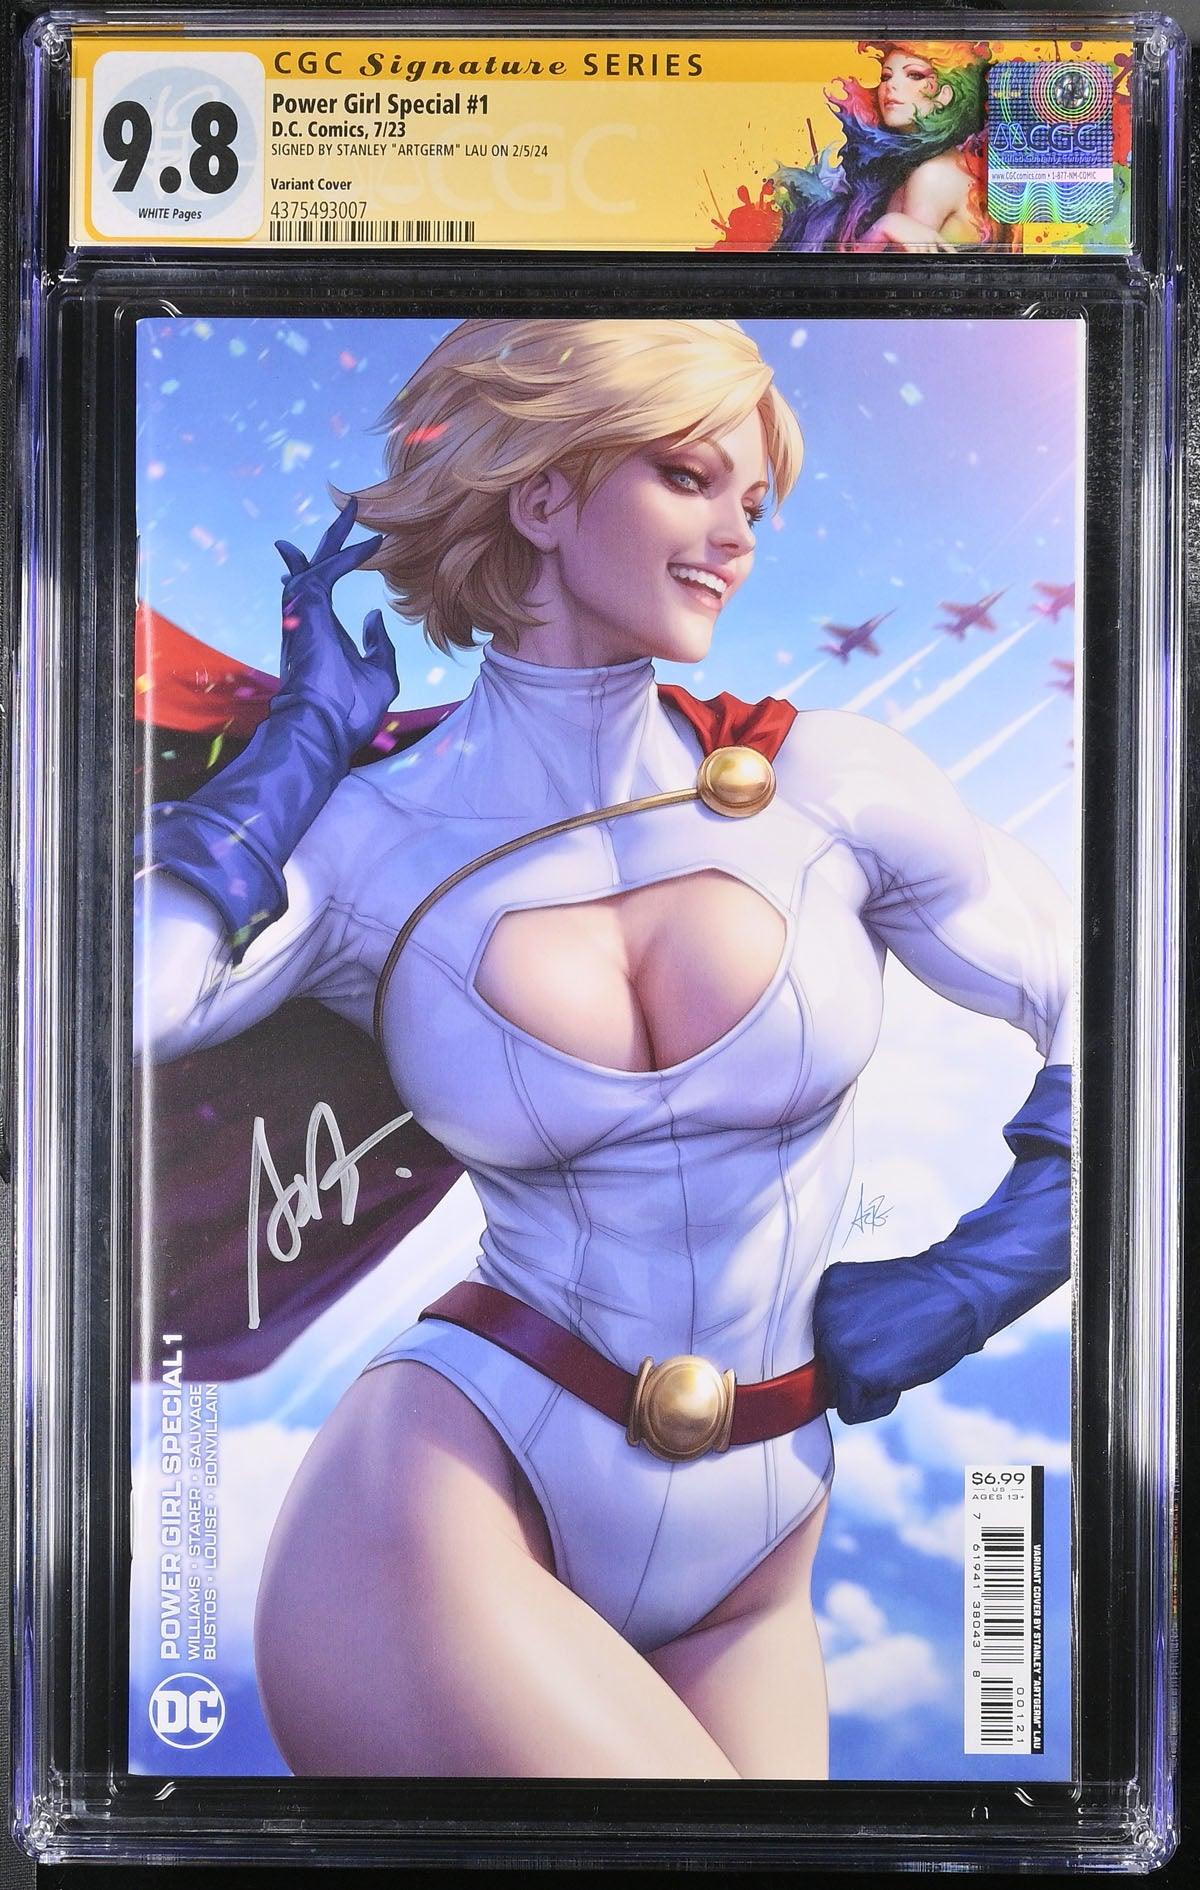 CGC POWER GIRL SPECIAL #1 LAU VARIANT (9.8) SIGNATURE SERIES - SIGNED BY STANLEY "ARTGERM" - Kings Comics